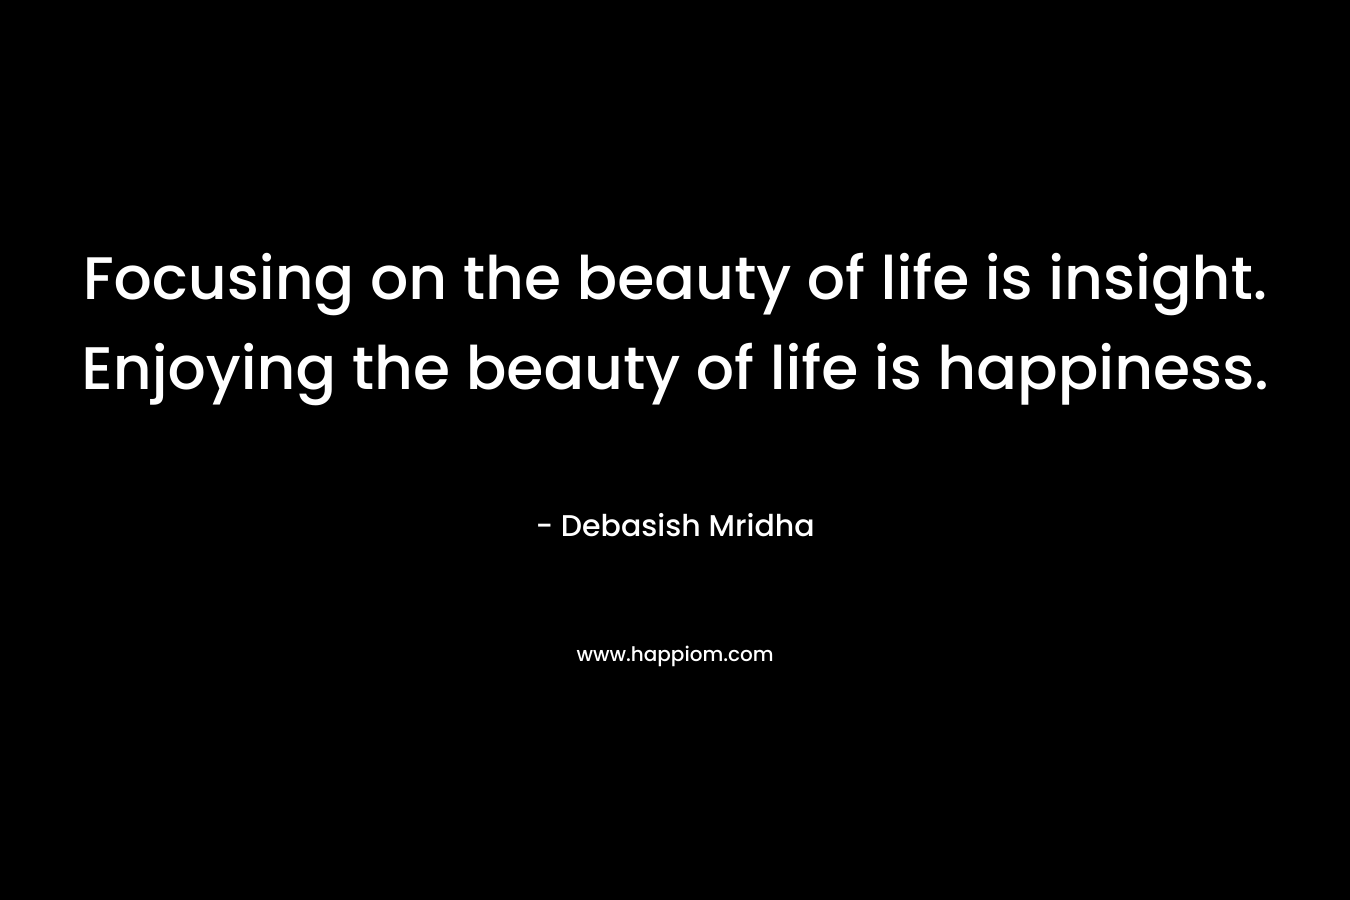 Focusing on the beauty of life is insight. Enjoying the beauty of life is happiness.